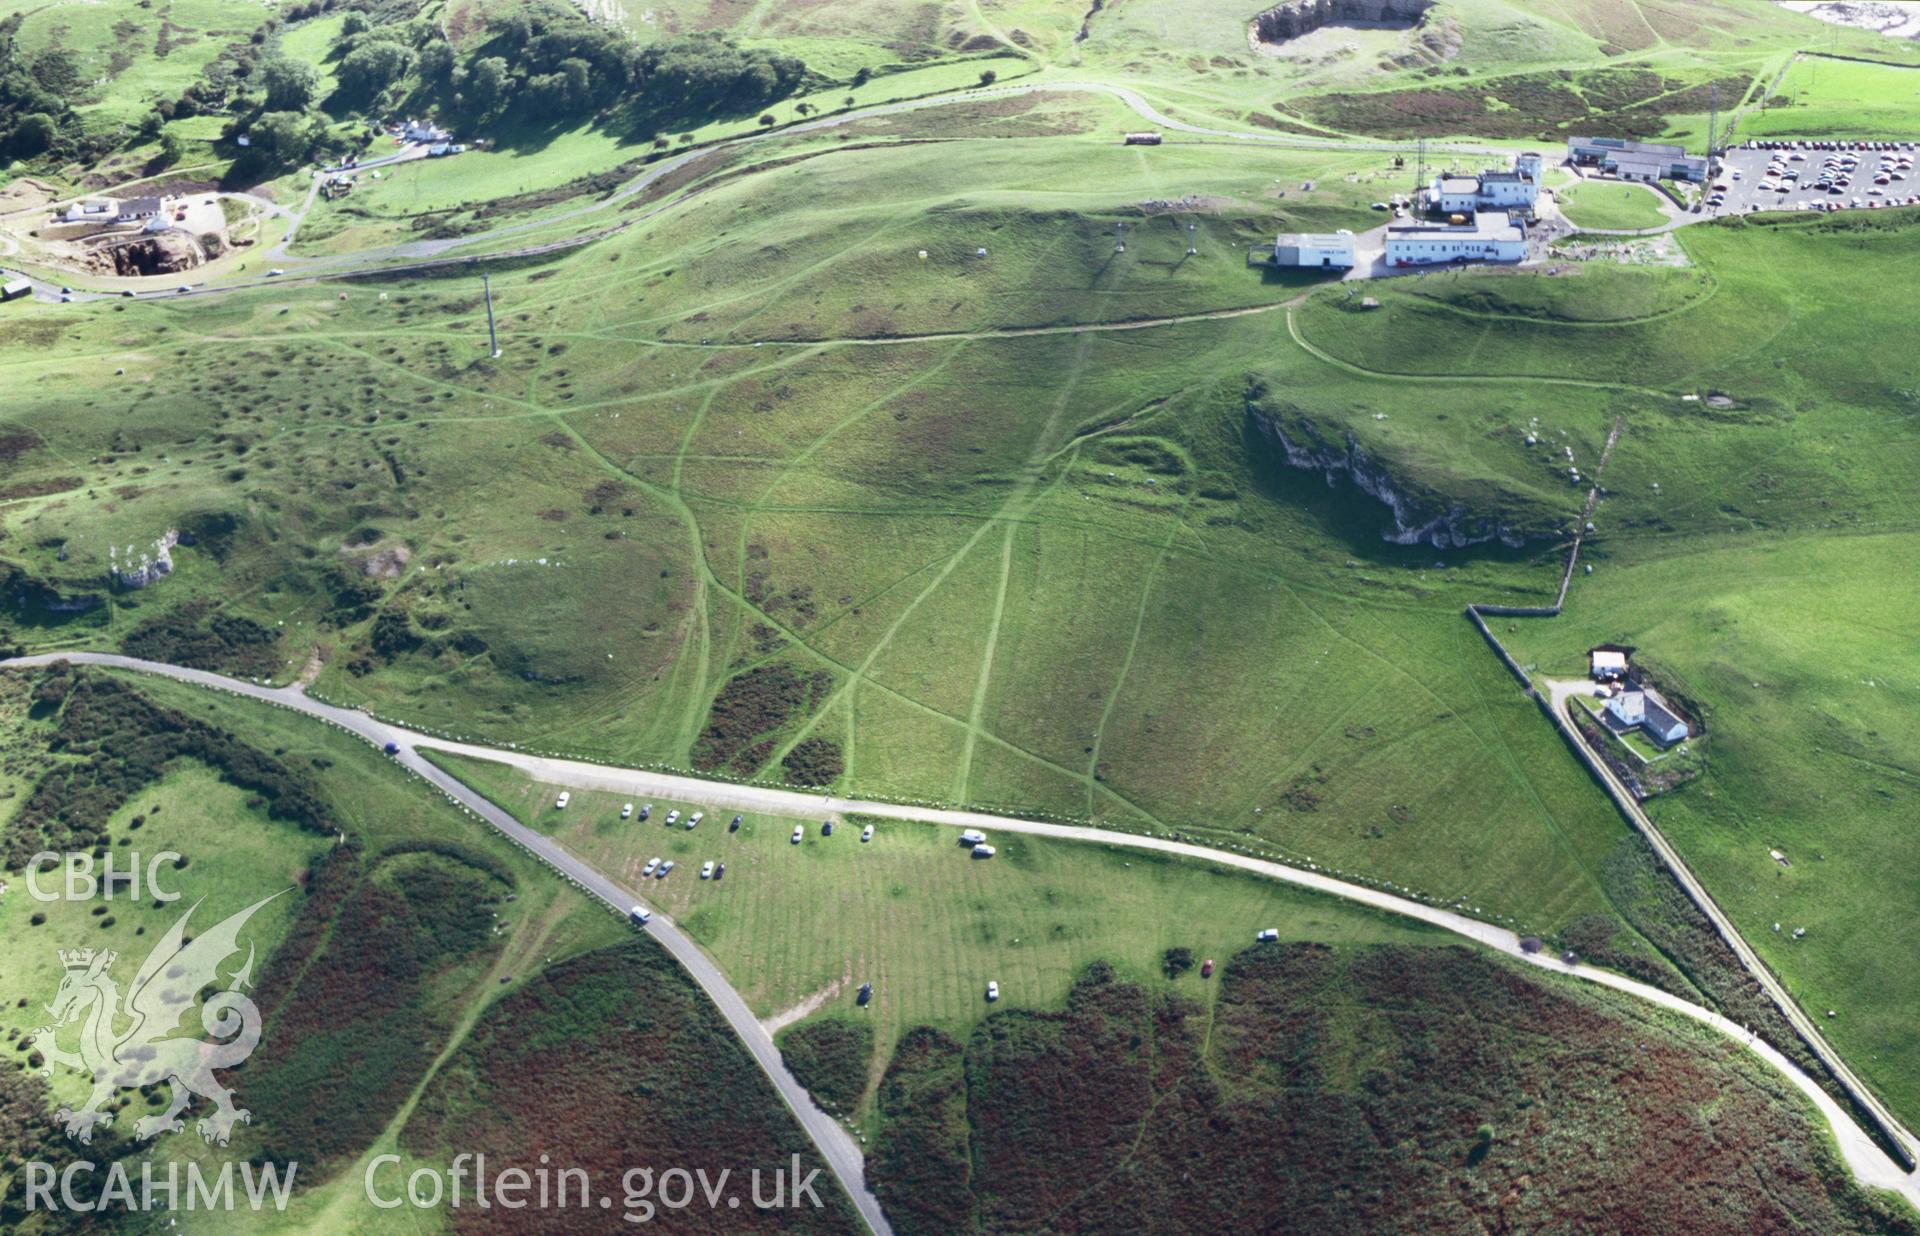 RCAHMW colour oblique aerial photograph showing Great Orme, taken by Toby Driver 2004.